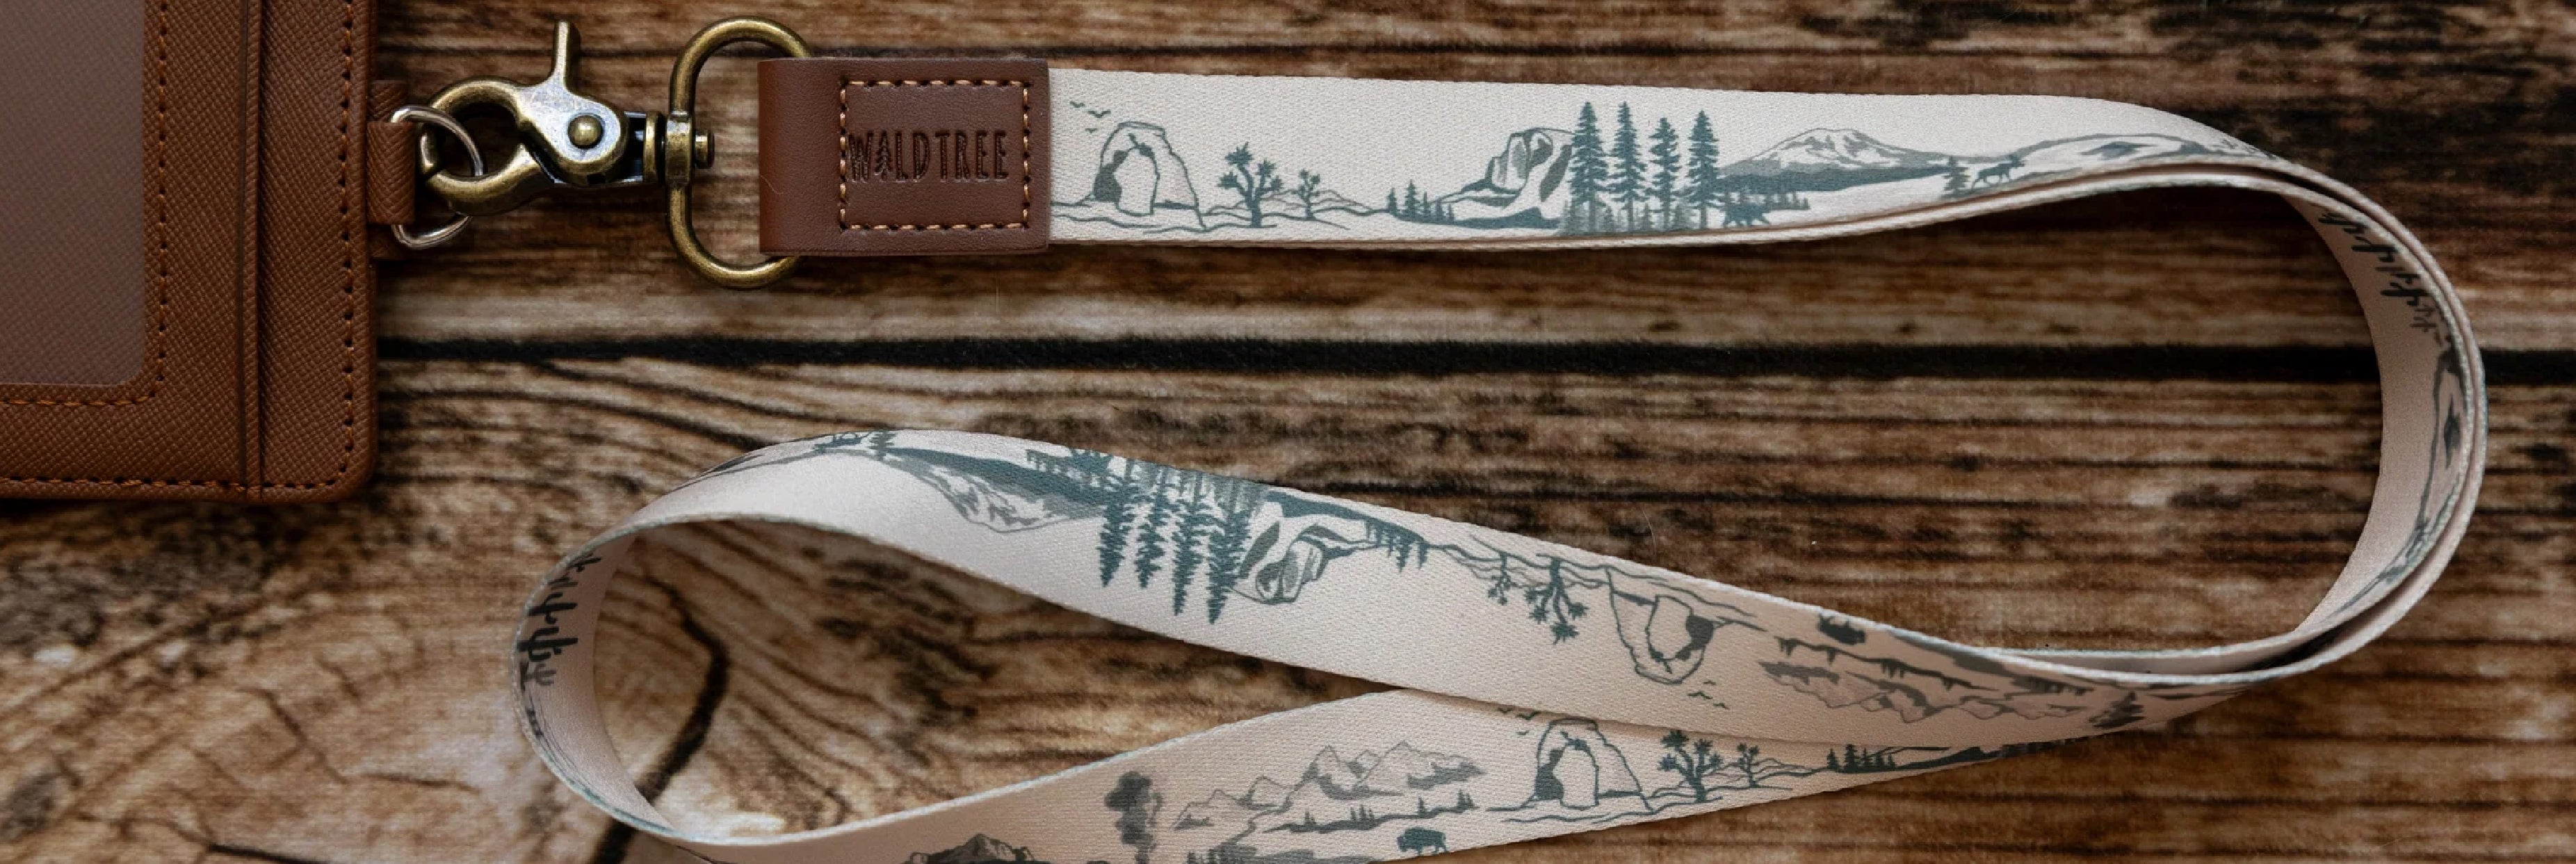 Wildtree National park designed long neck lanyard connected to id badge